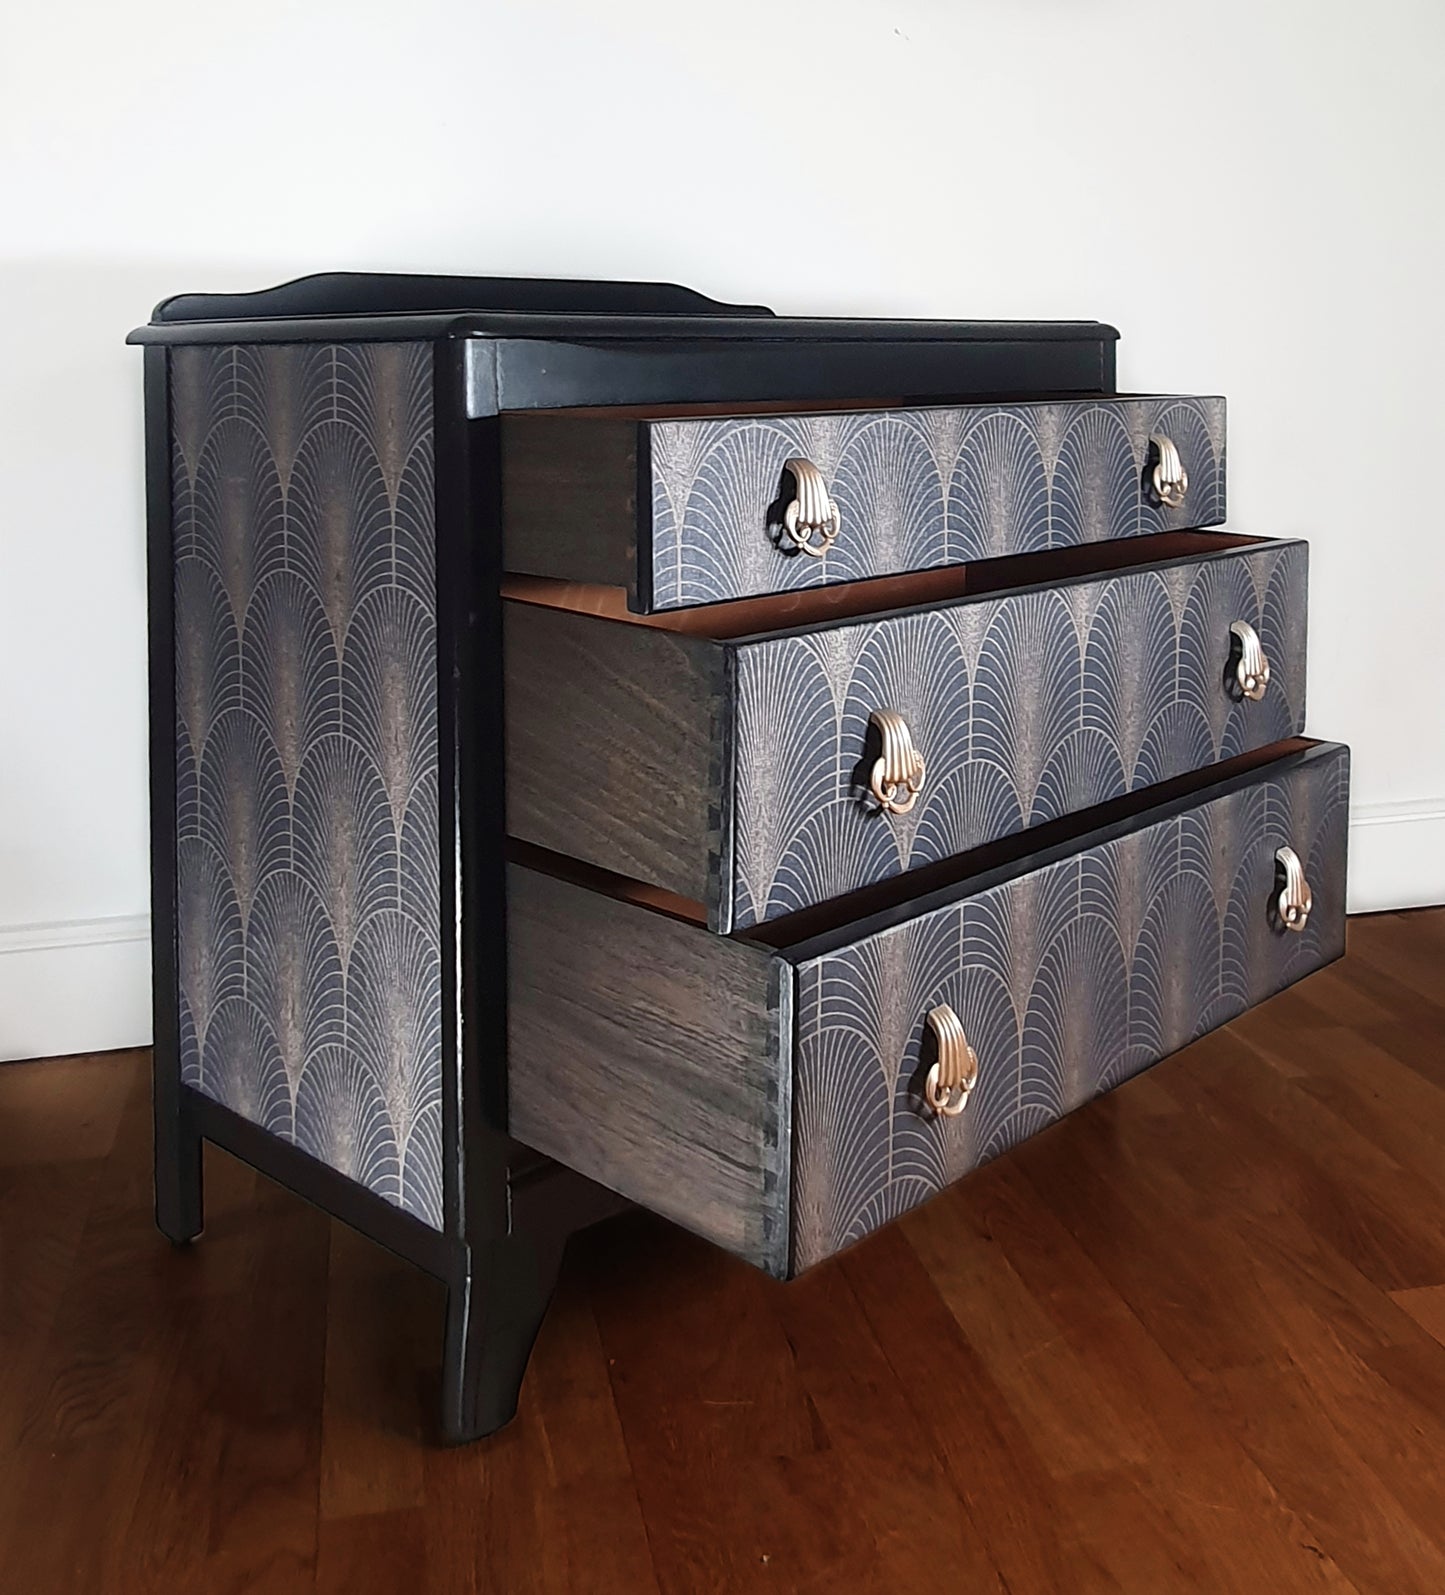 Art Deco style upcycled vintage Chest of Drawers